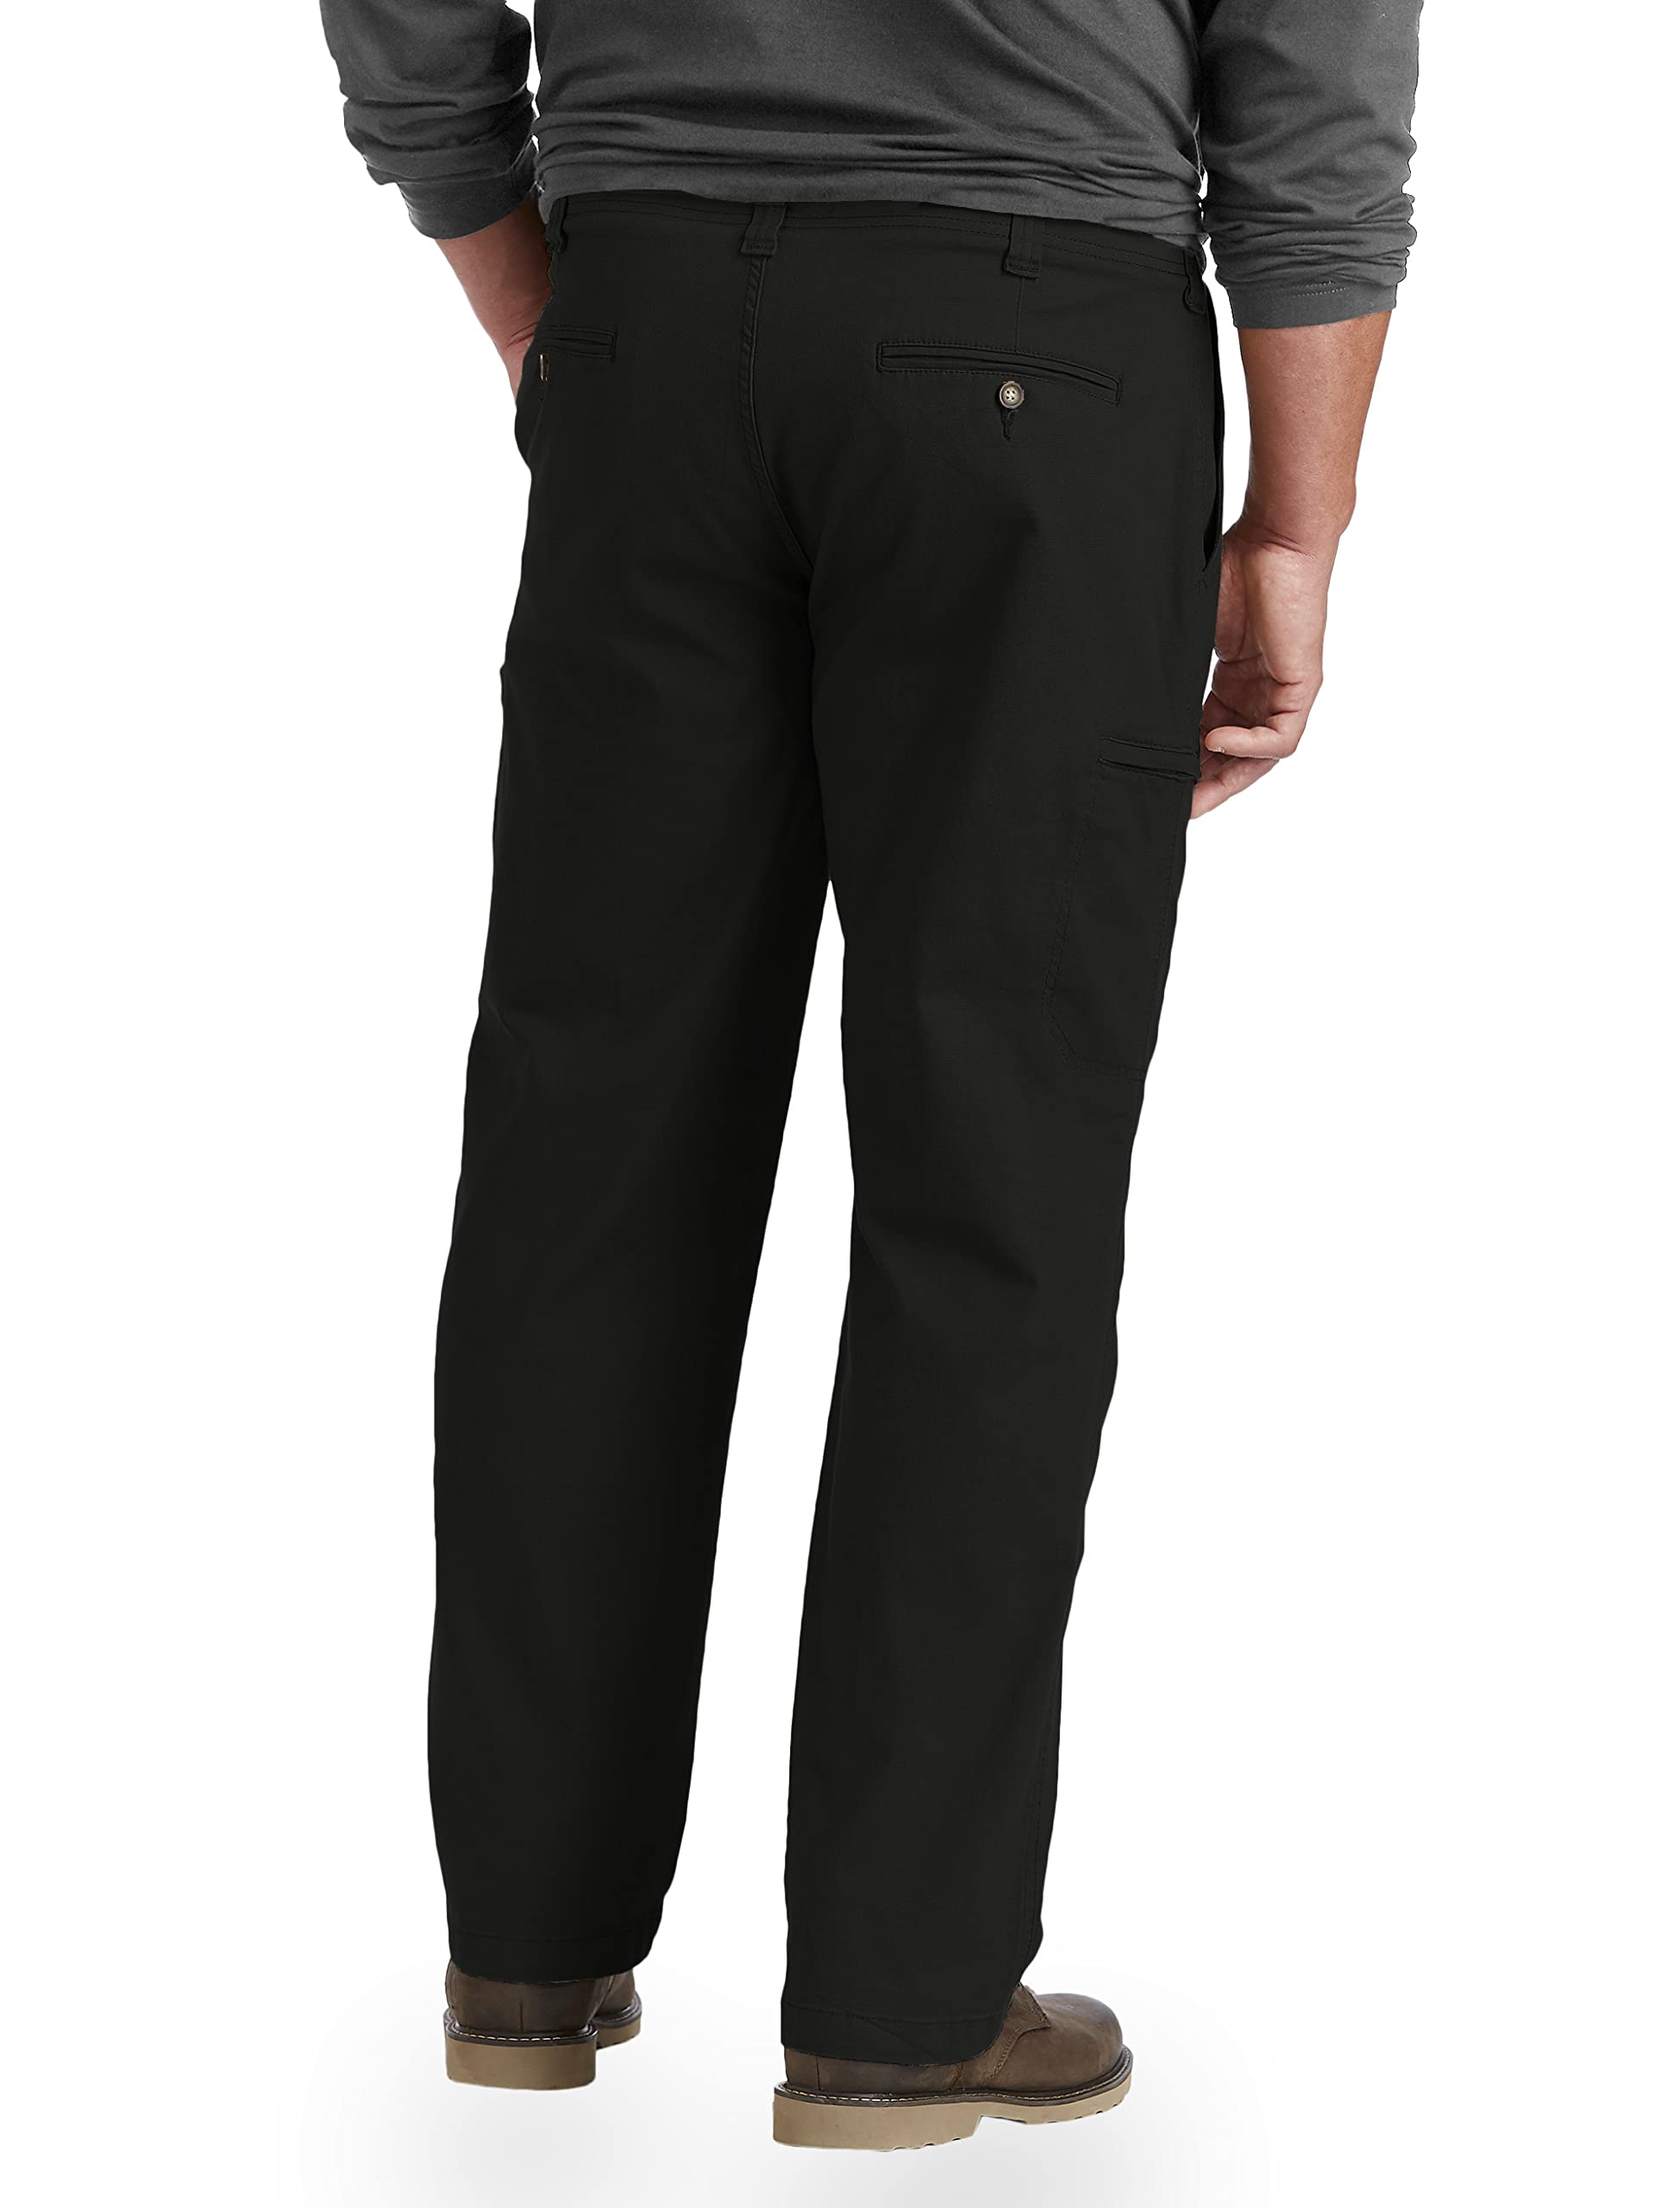 Lee Men's Big & Tall Extreme Motion Canvas Cargo Pant